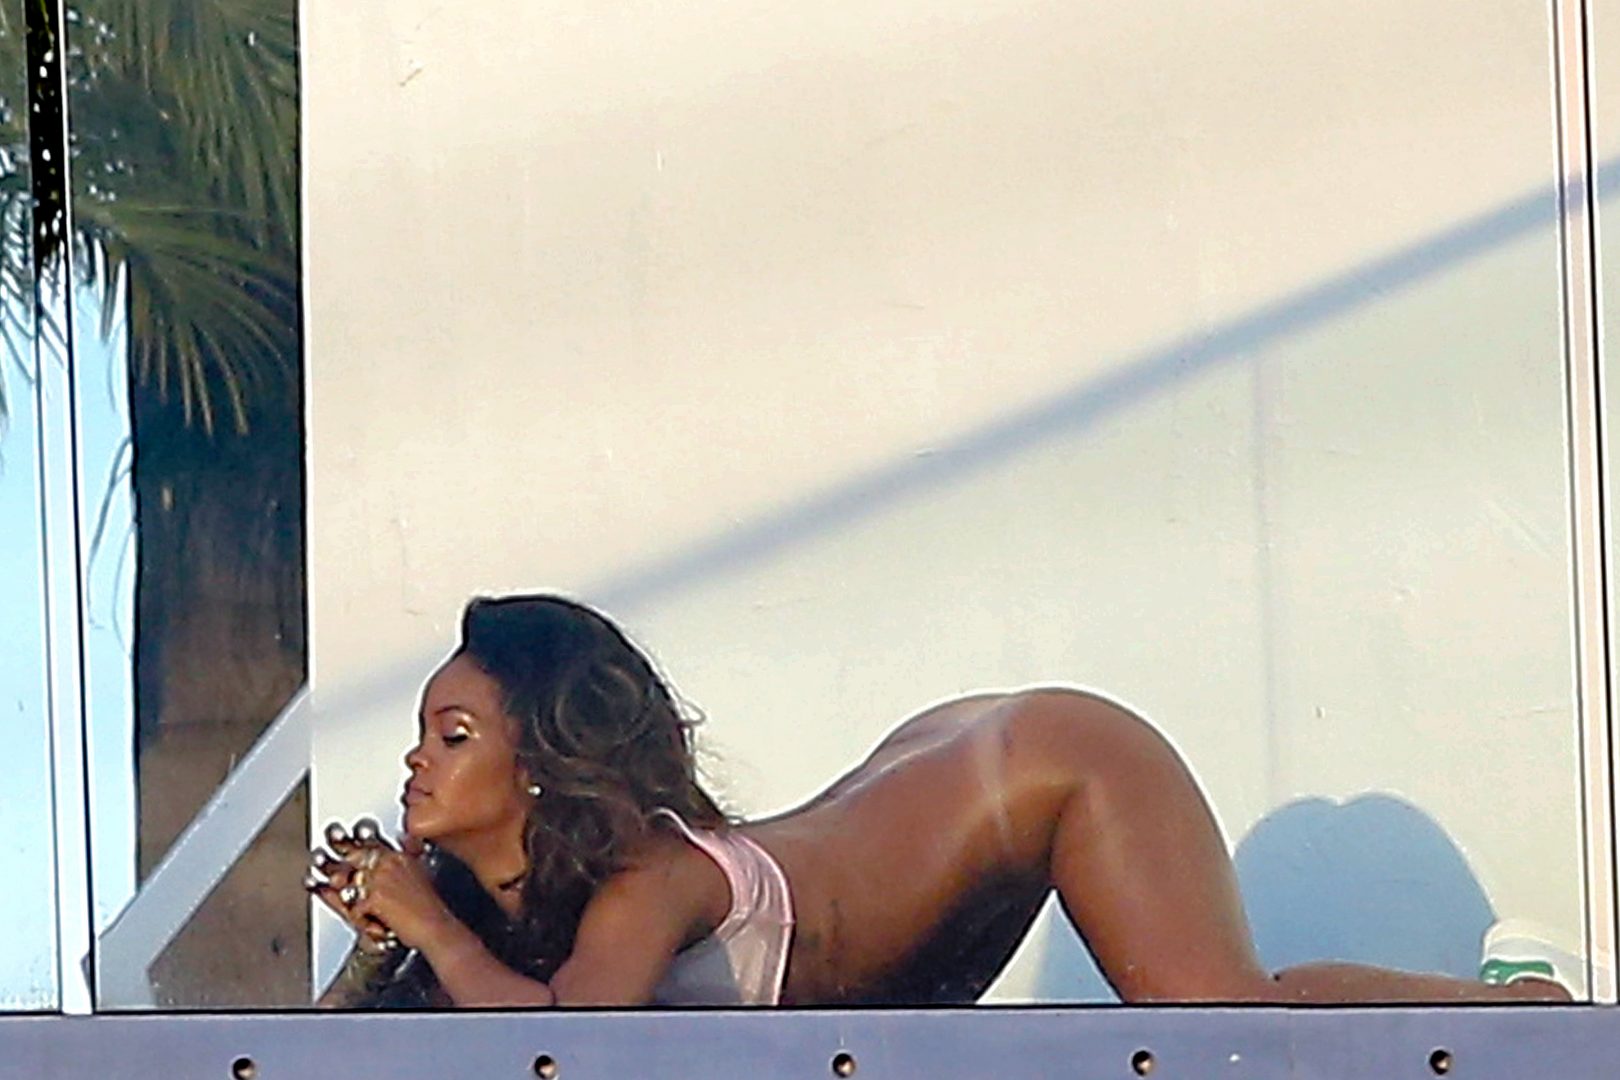 EXCLUSIVE TO INF. PLEASE CALL FOR PRICING April 8, 2014: Rihanna poses semi nude for a photo shoot today in the Hollywood Hills, CA. Mandatory Credit: Chiva/INFphoto.com Ref.: infusla-276|sp|EXCLUSIVE TO INF. PLEASE CALL FOR PRICING